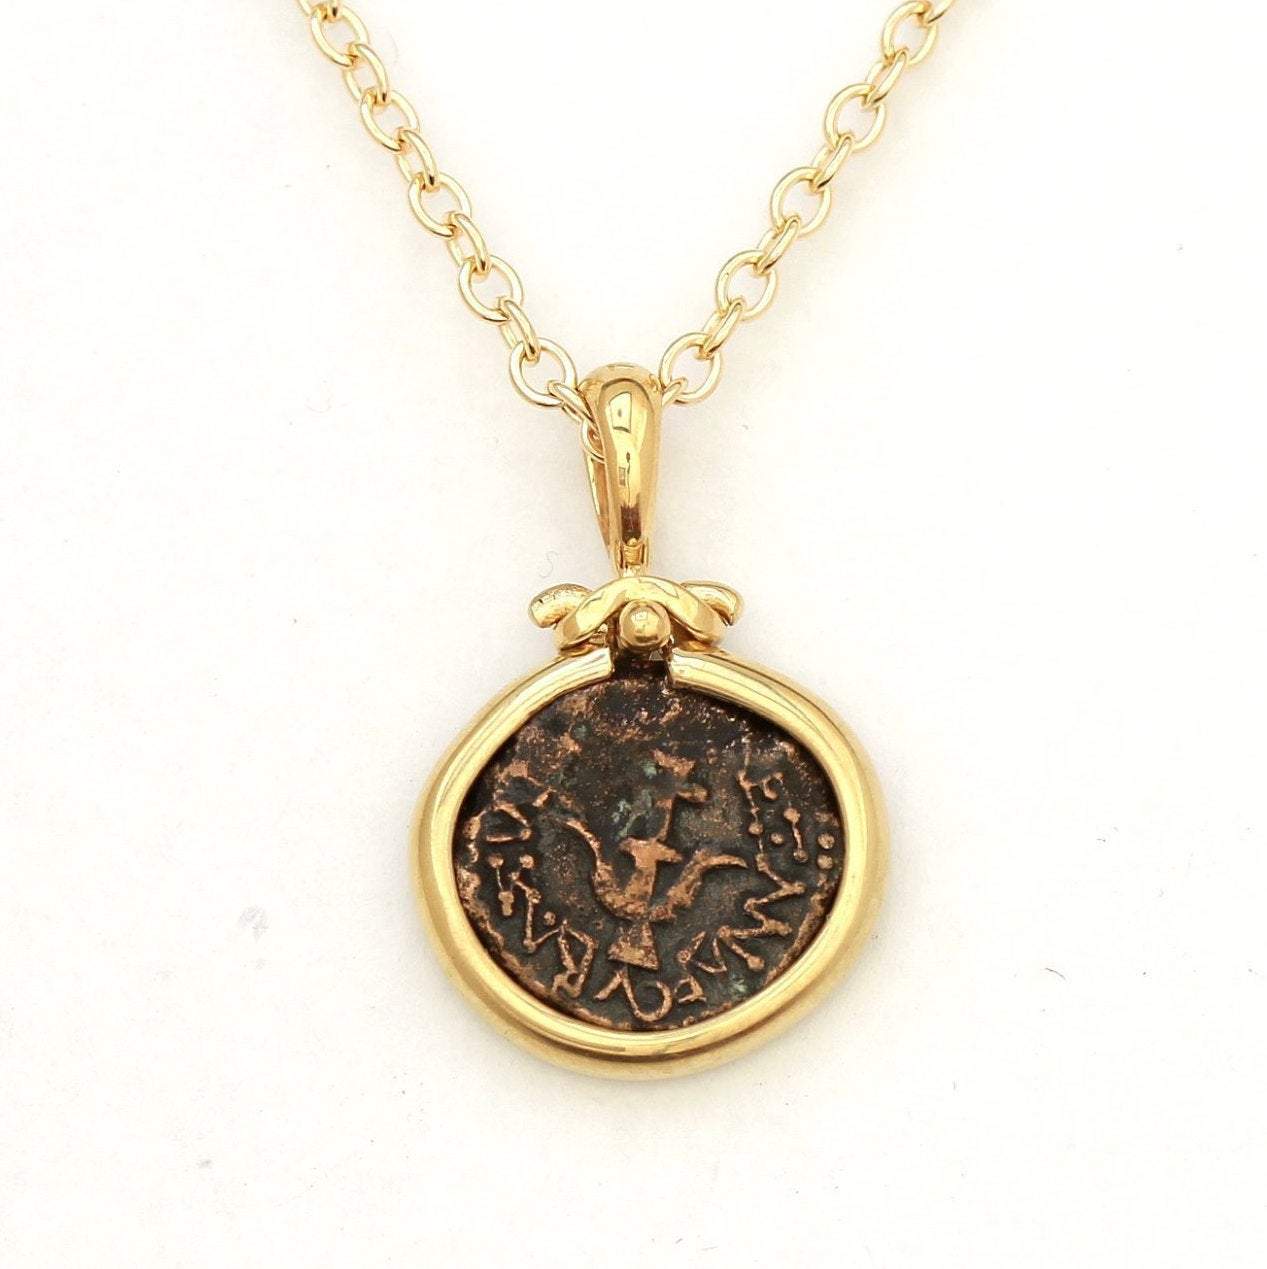 Widows Mite, 18K Gold Pendant, Genuine Ancient Coin, with Certificate8048 - Erez Ancient Coin Jewelry 